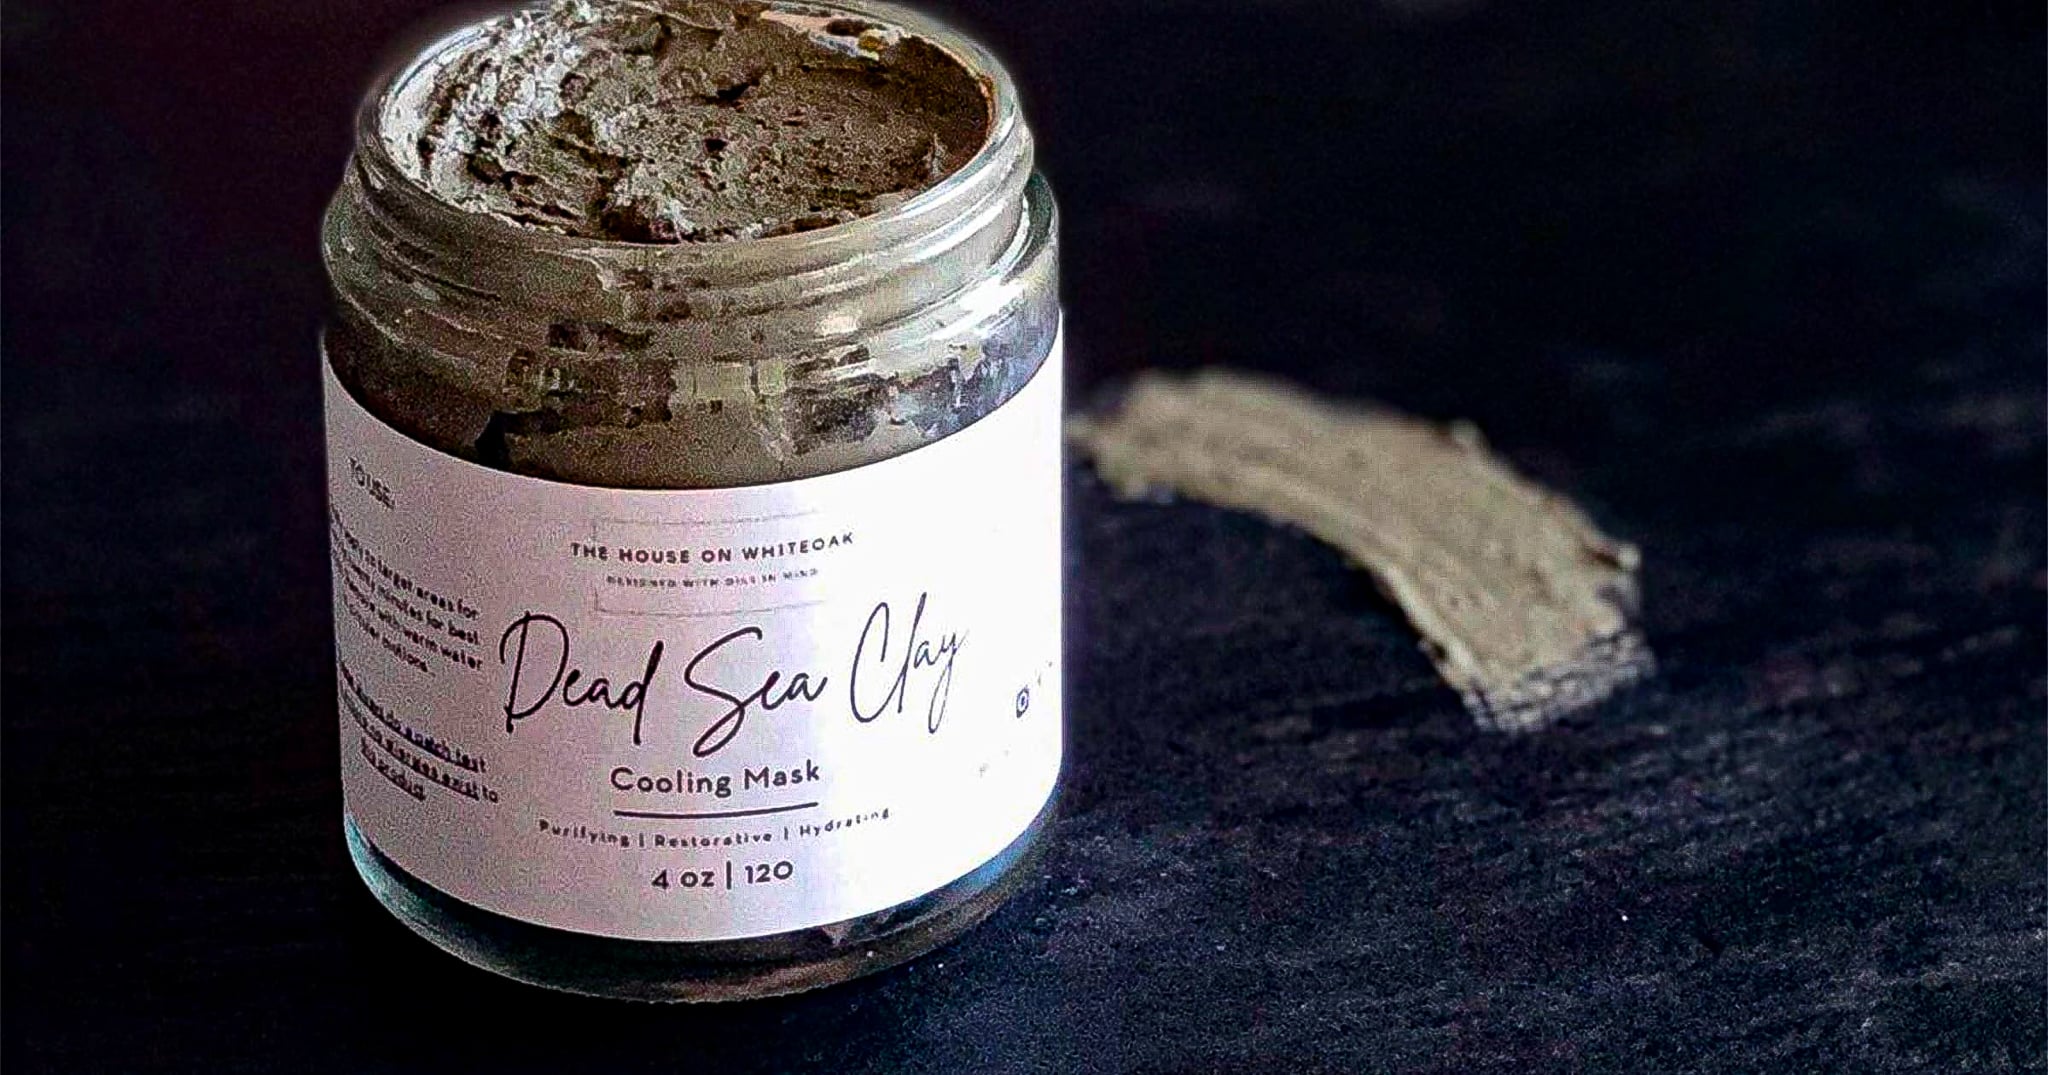 Dead Sea Clay Cooling Mask